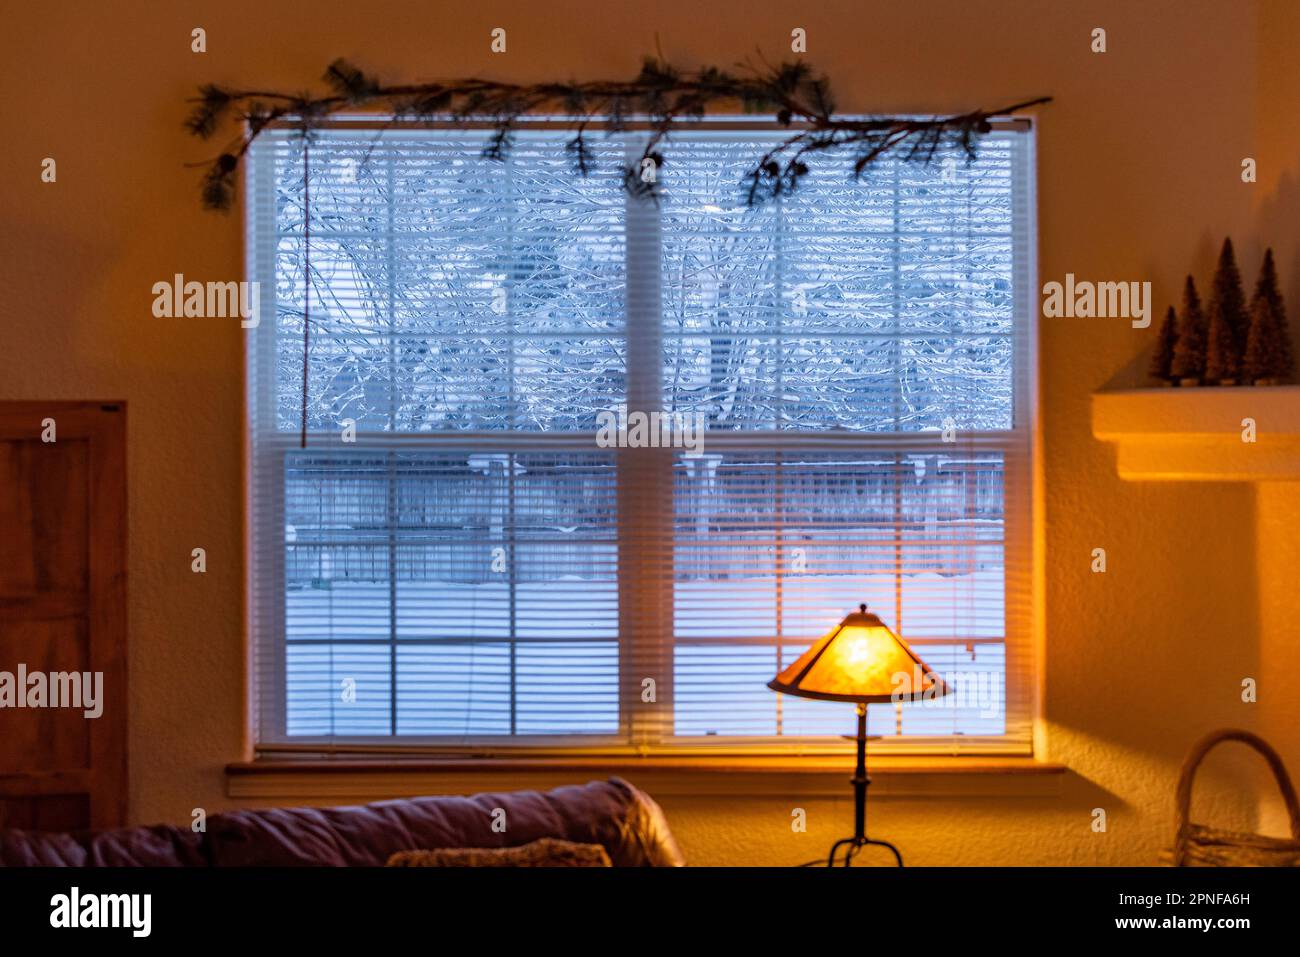 View from living room to snowy outdoors Stock Photo